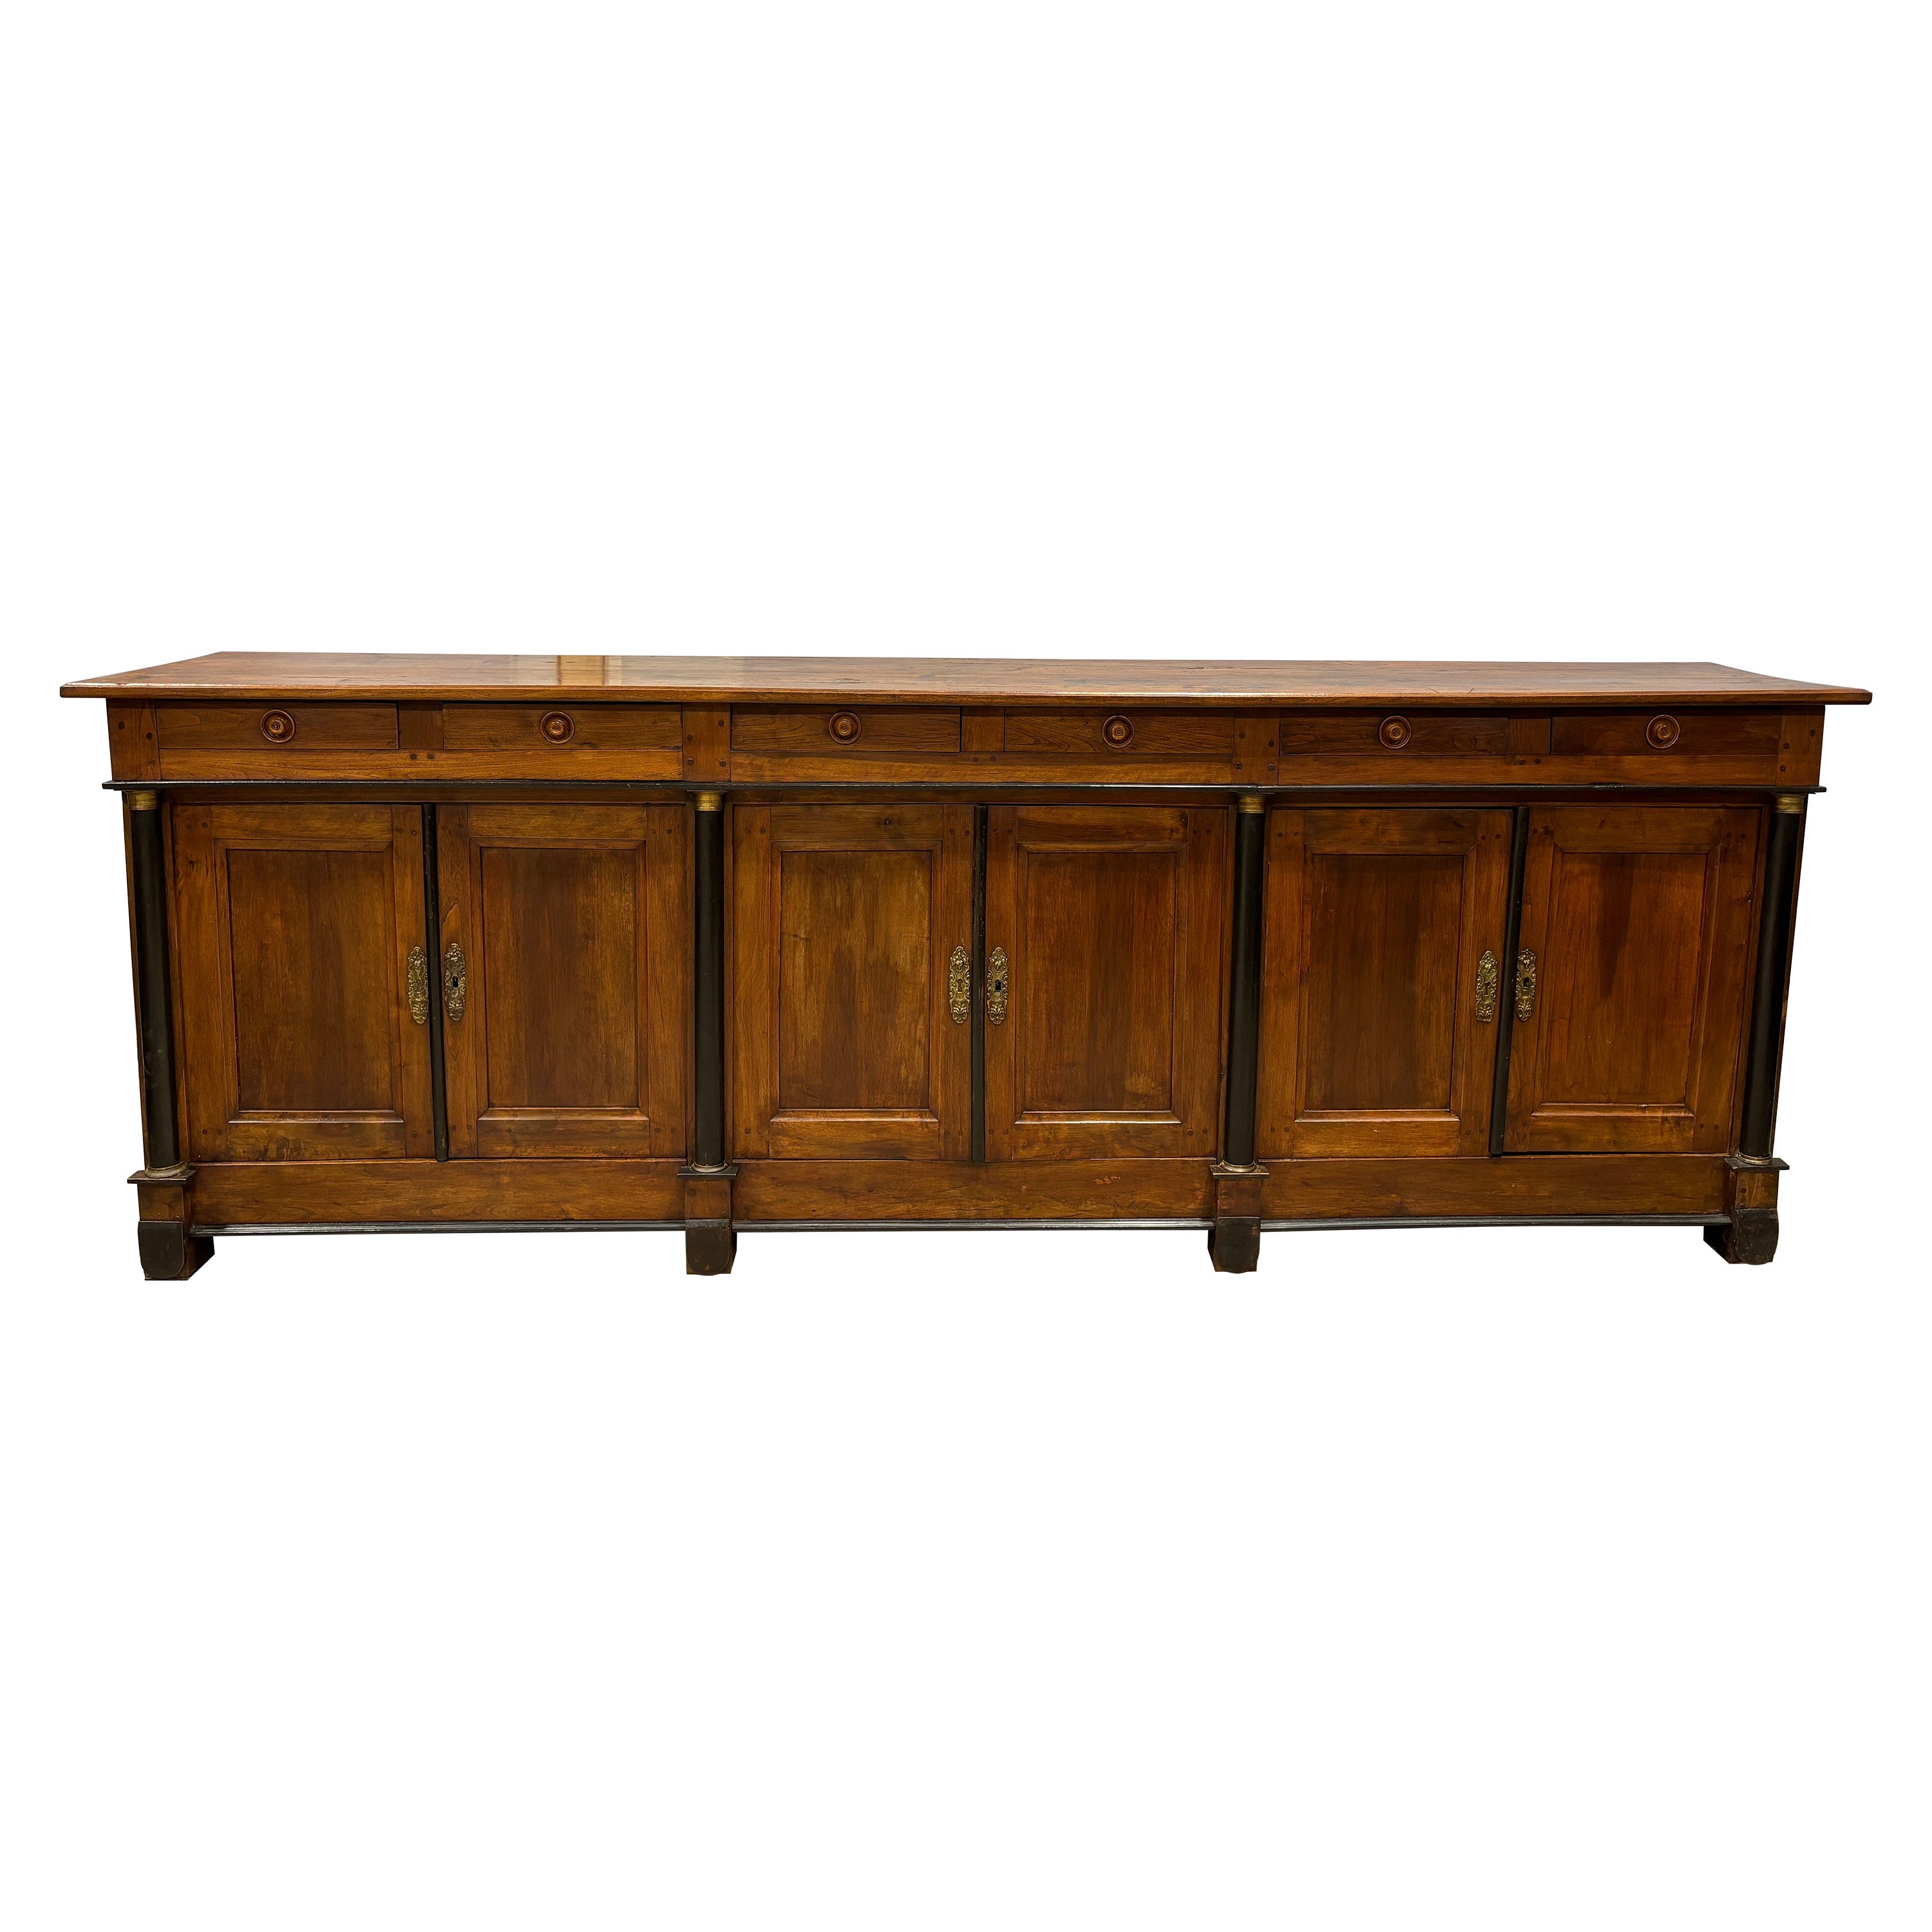 French Early 19th Century Empire Sideboard